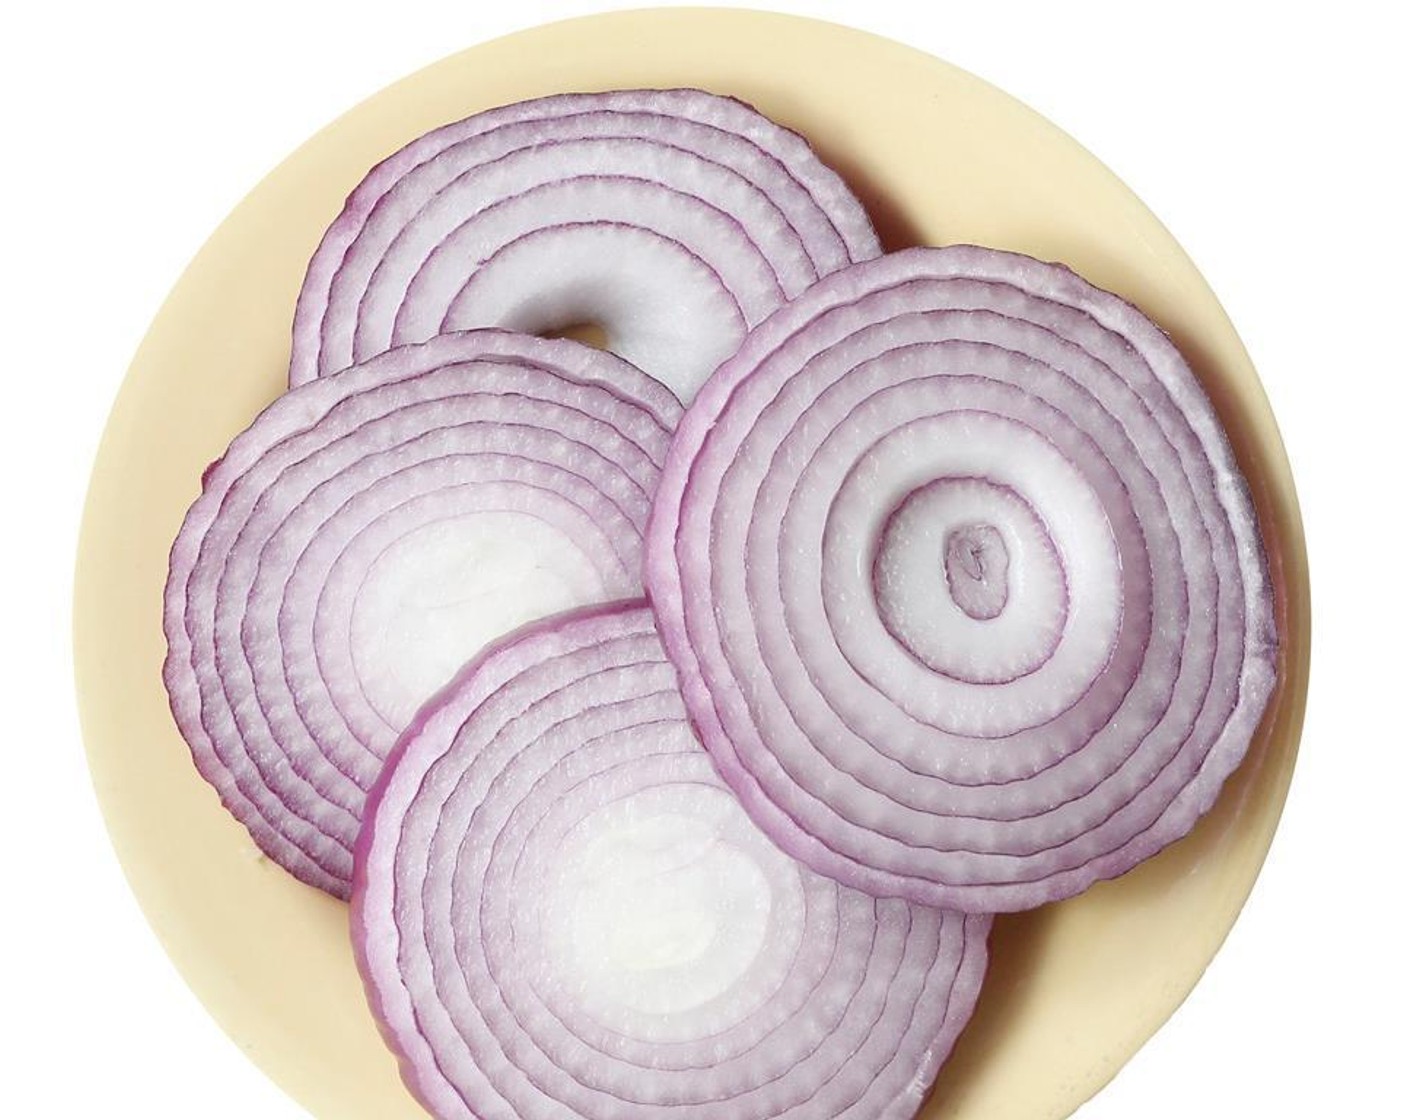 step 2 Thinly slice the Scallion (1 bunch). Finely chop the Garlic (2 cloves) and slice the Red Onion (1) into 1/2 inch slices. Cut the Sweet Potato (1) in half lengthwise and then into wedges.